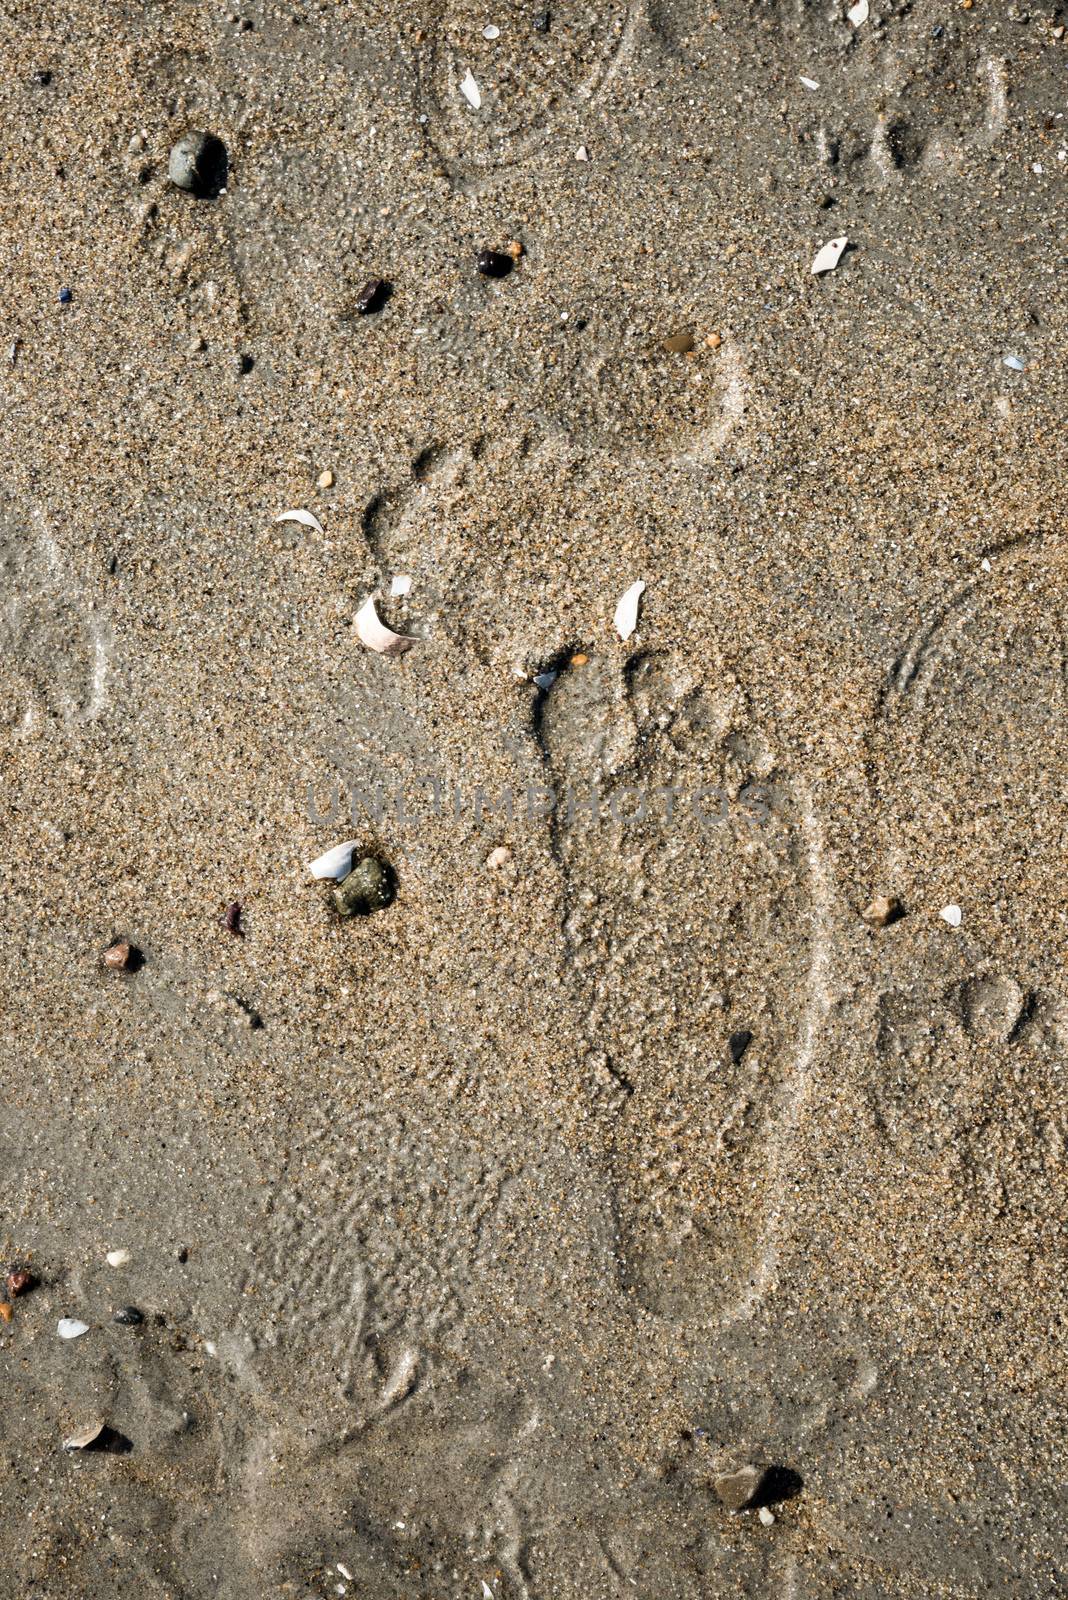 Foot prints on a beach  by IVYPHOTOS